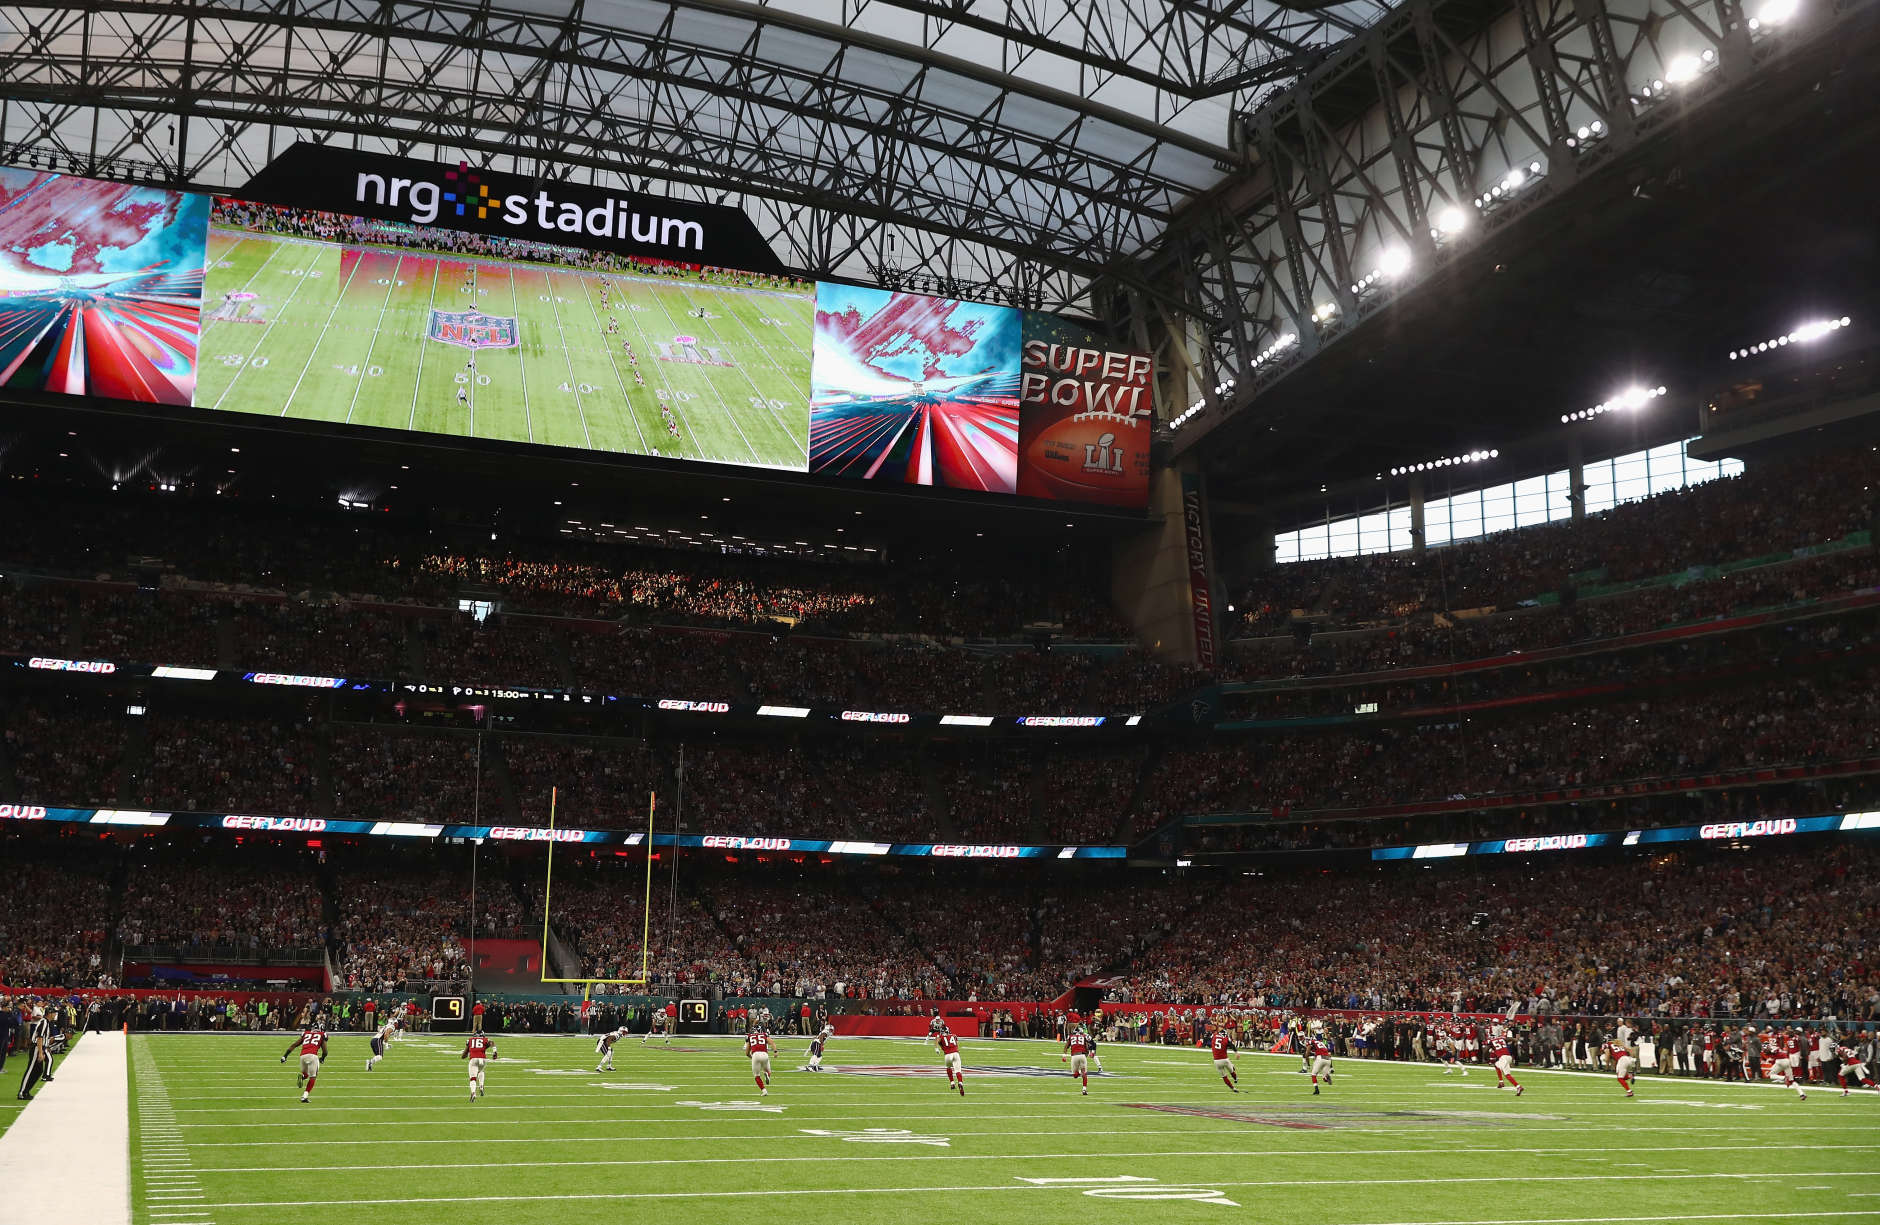 HOUSTON, TX - FEBRUARY 05: A general view of the kick off  during Super Bowl 51 between the New England Patriots and the Atlanta Falcons at NRG Stadium on February 5, 2017 in Houston, Texas.  (Photo by Elsa/Getty Images)